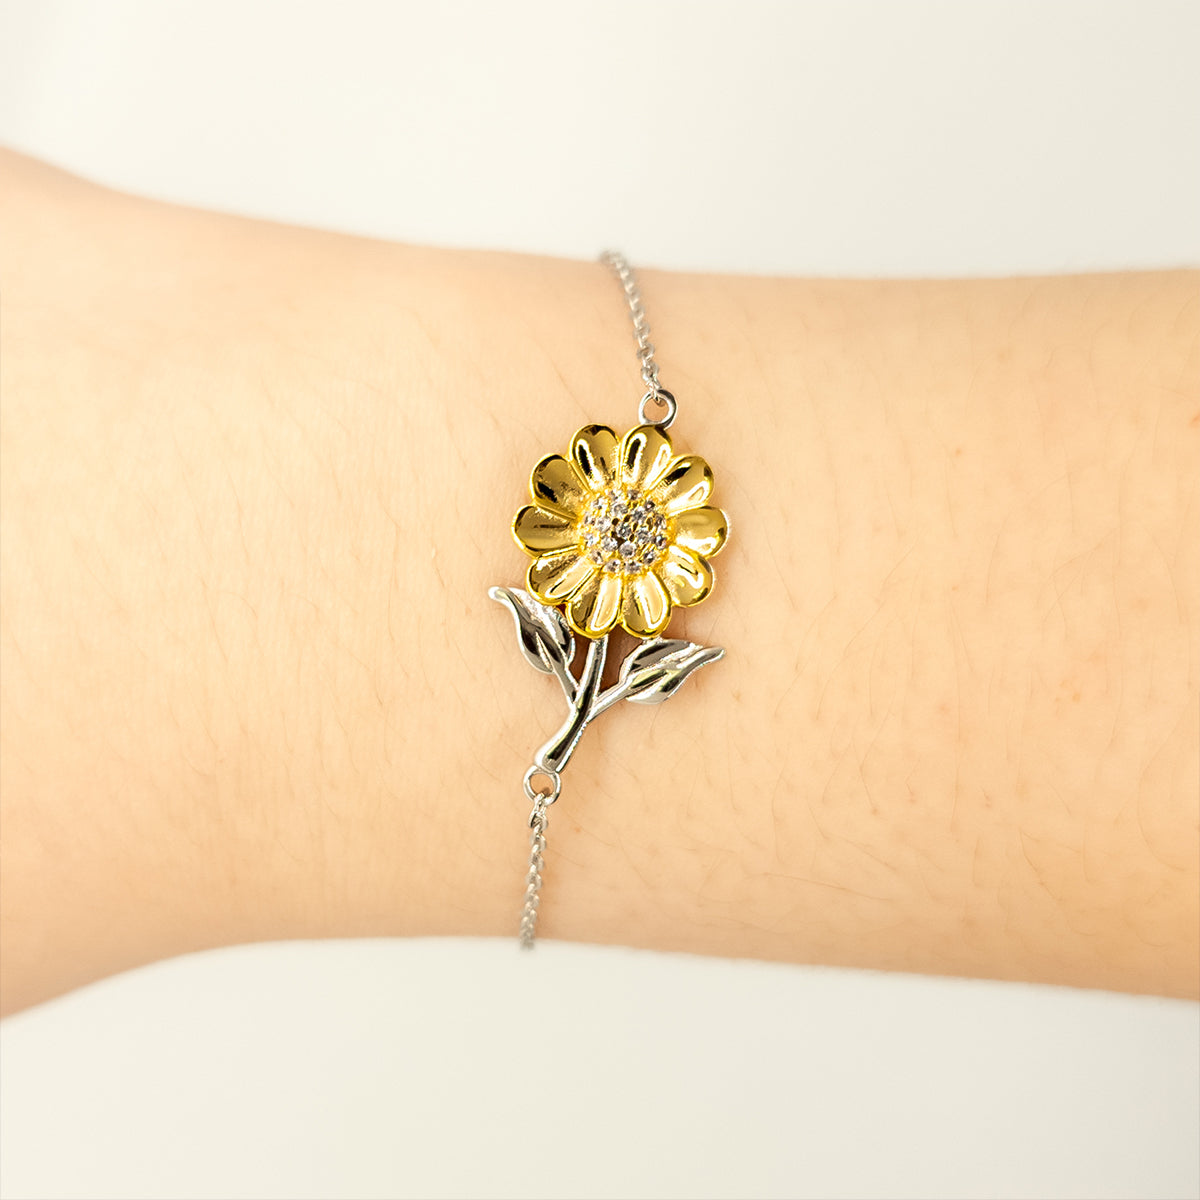 Niece Sunflower Bracelet, Never forget that I love you forever, Inspirational Niece Birthday Unique Gifts From Favorite uncle